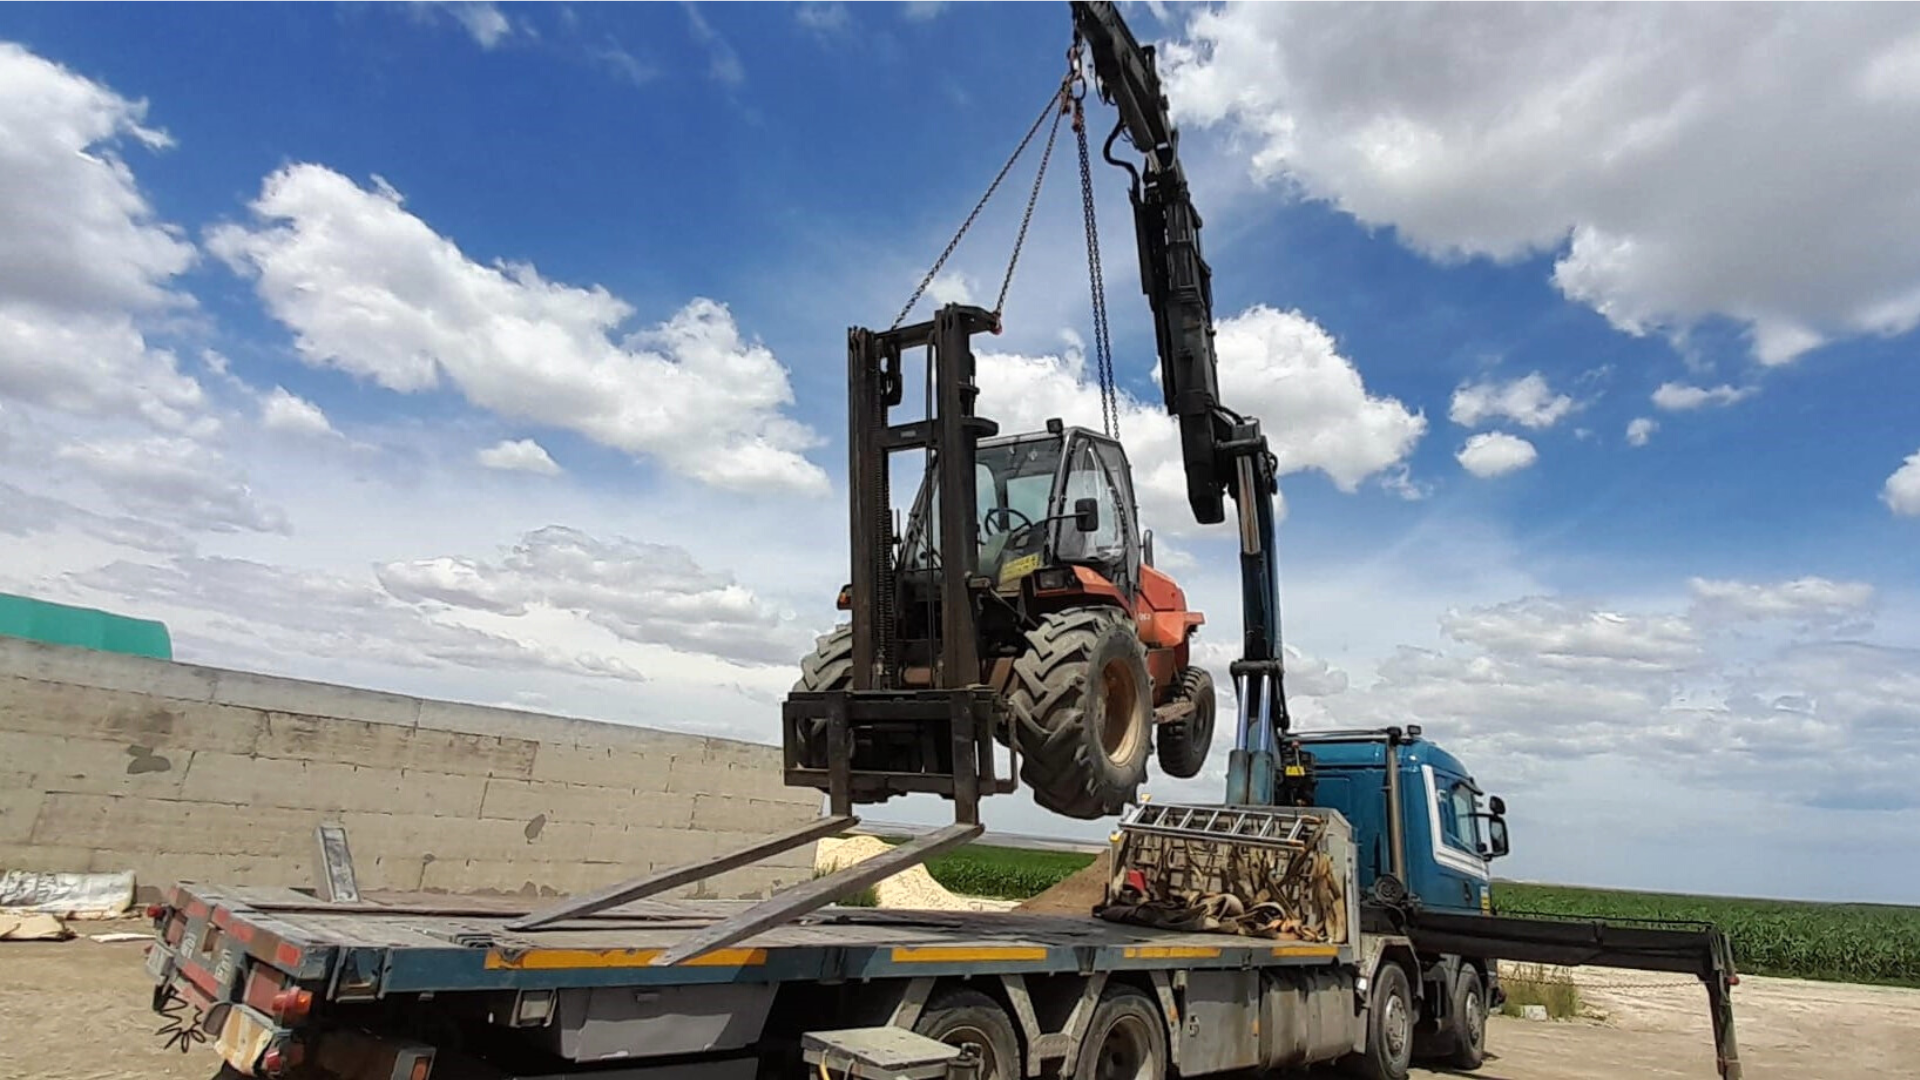 Rough-Terrain Forklift Hire for Lifting a tarp